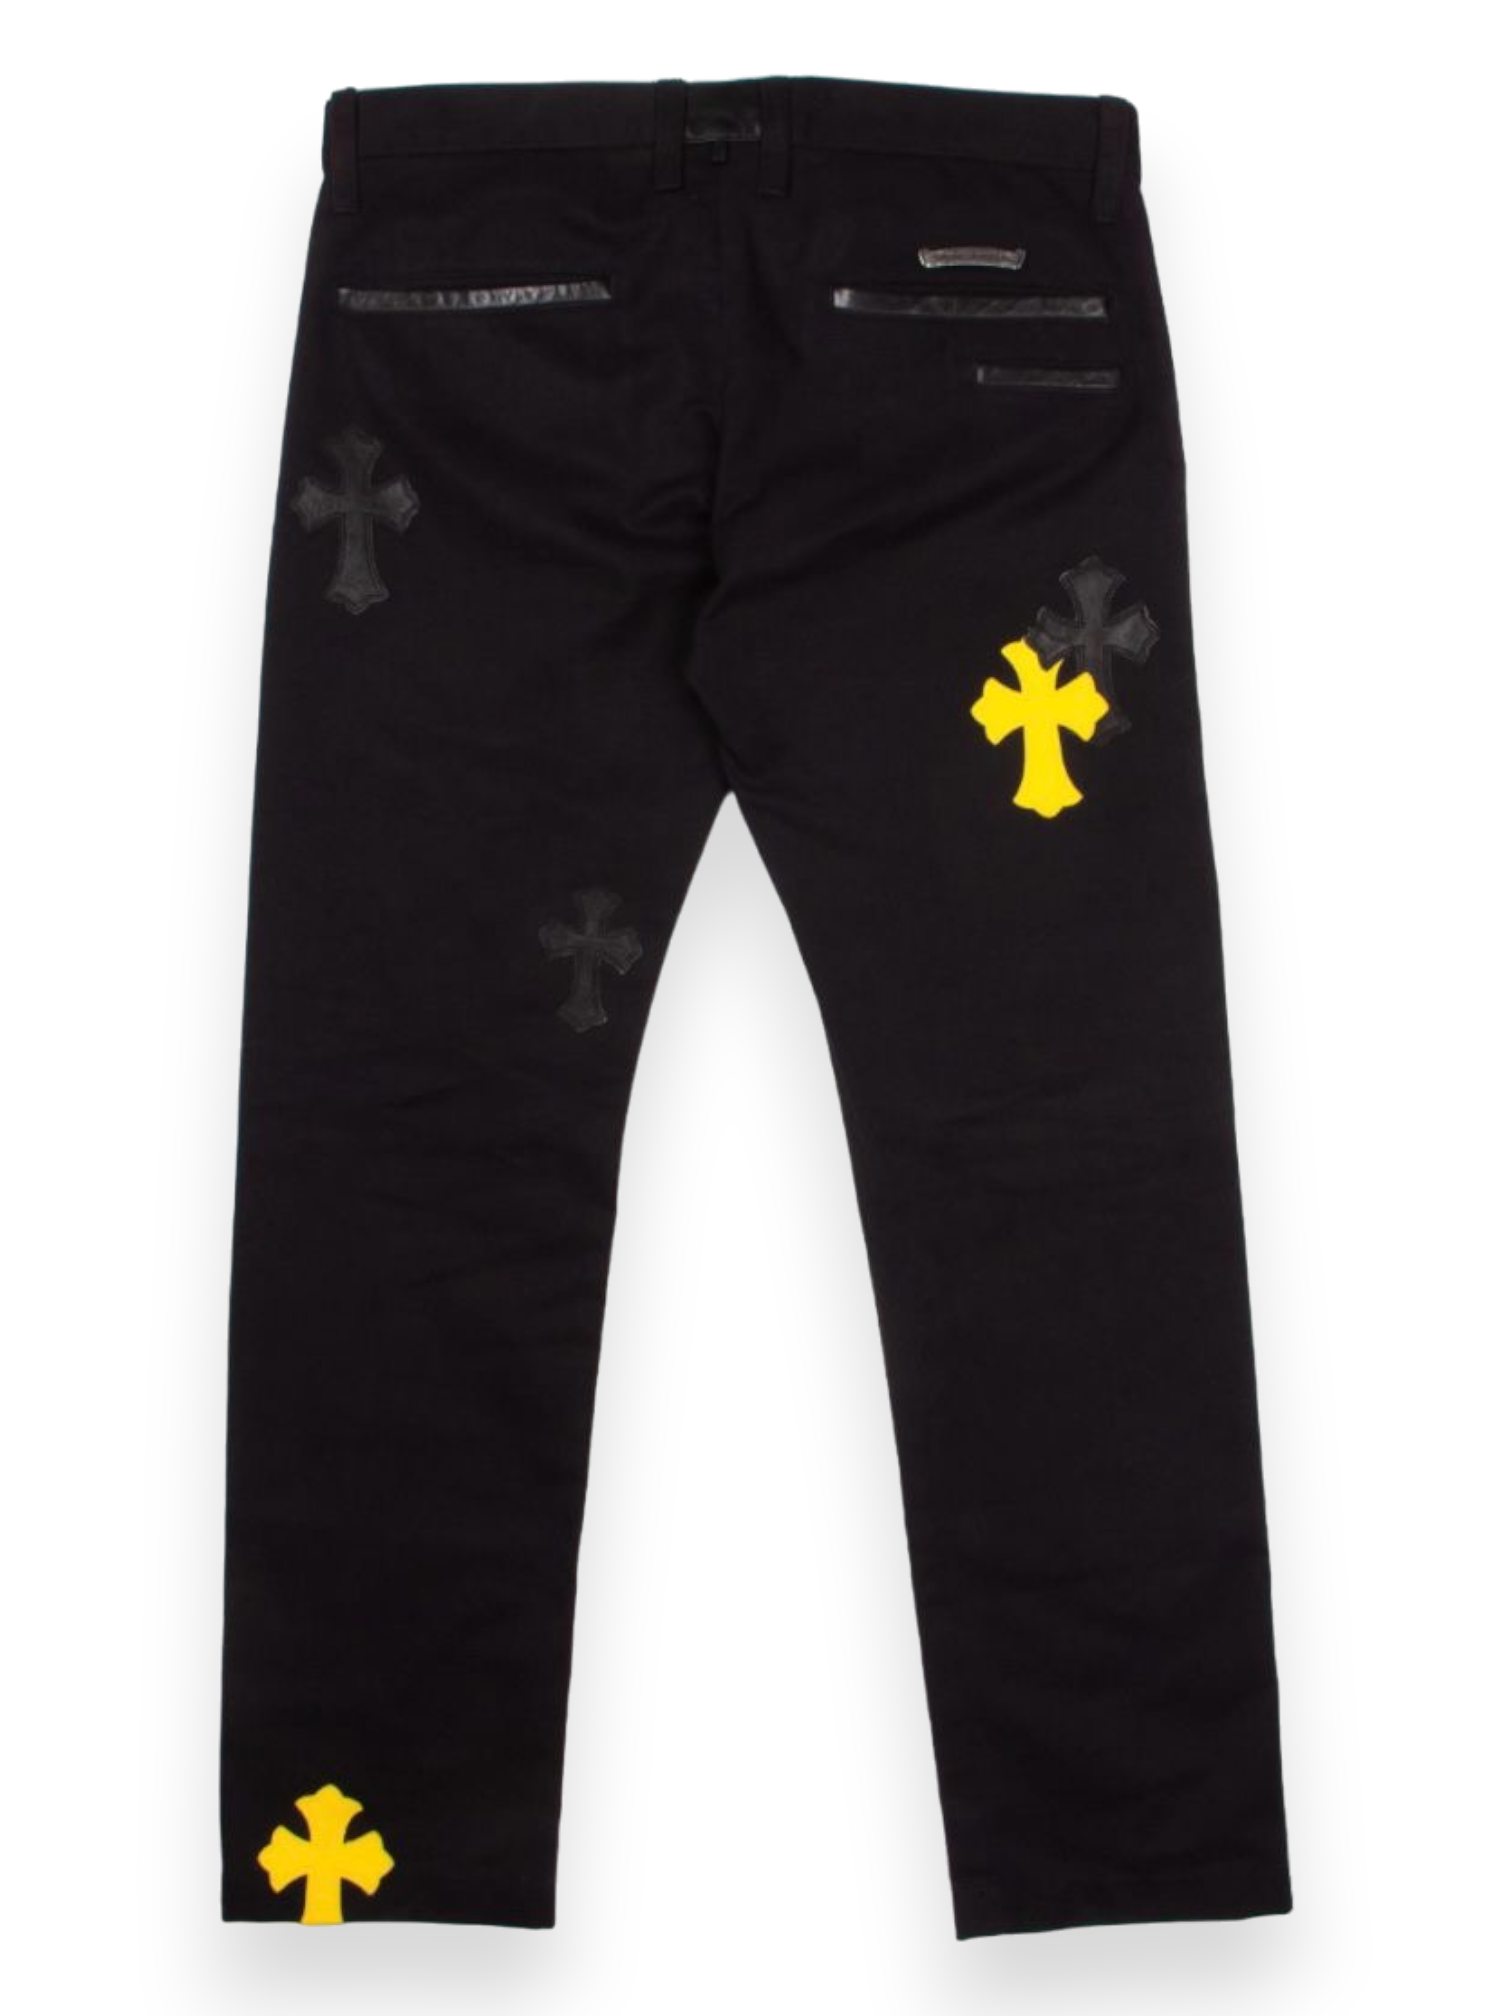 Chrome Hearts 1/1 Yellow Cross Patch Black Chinos